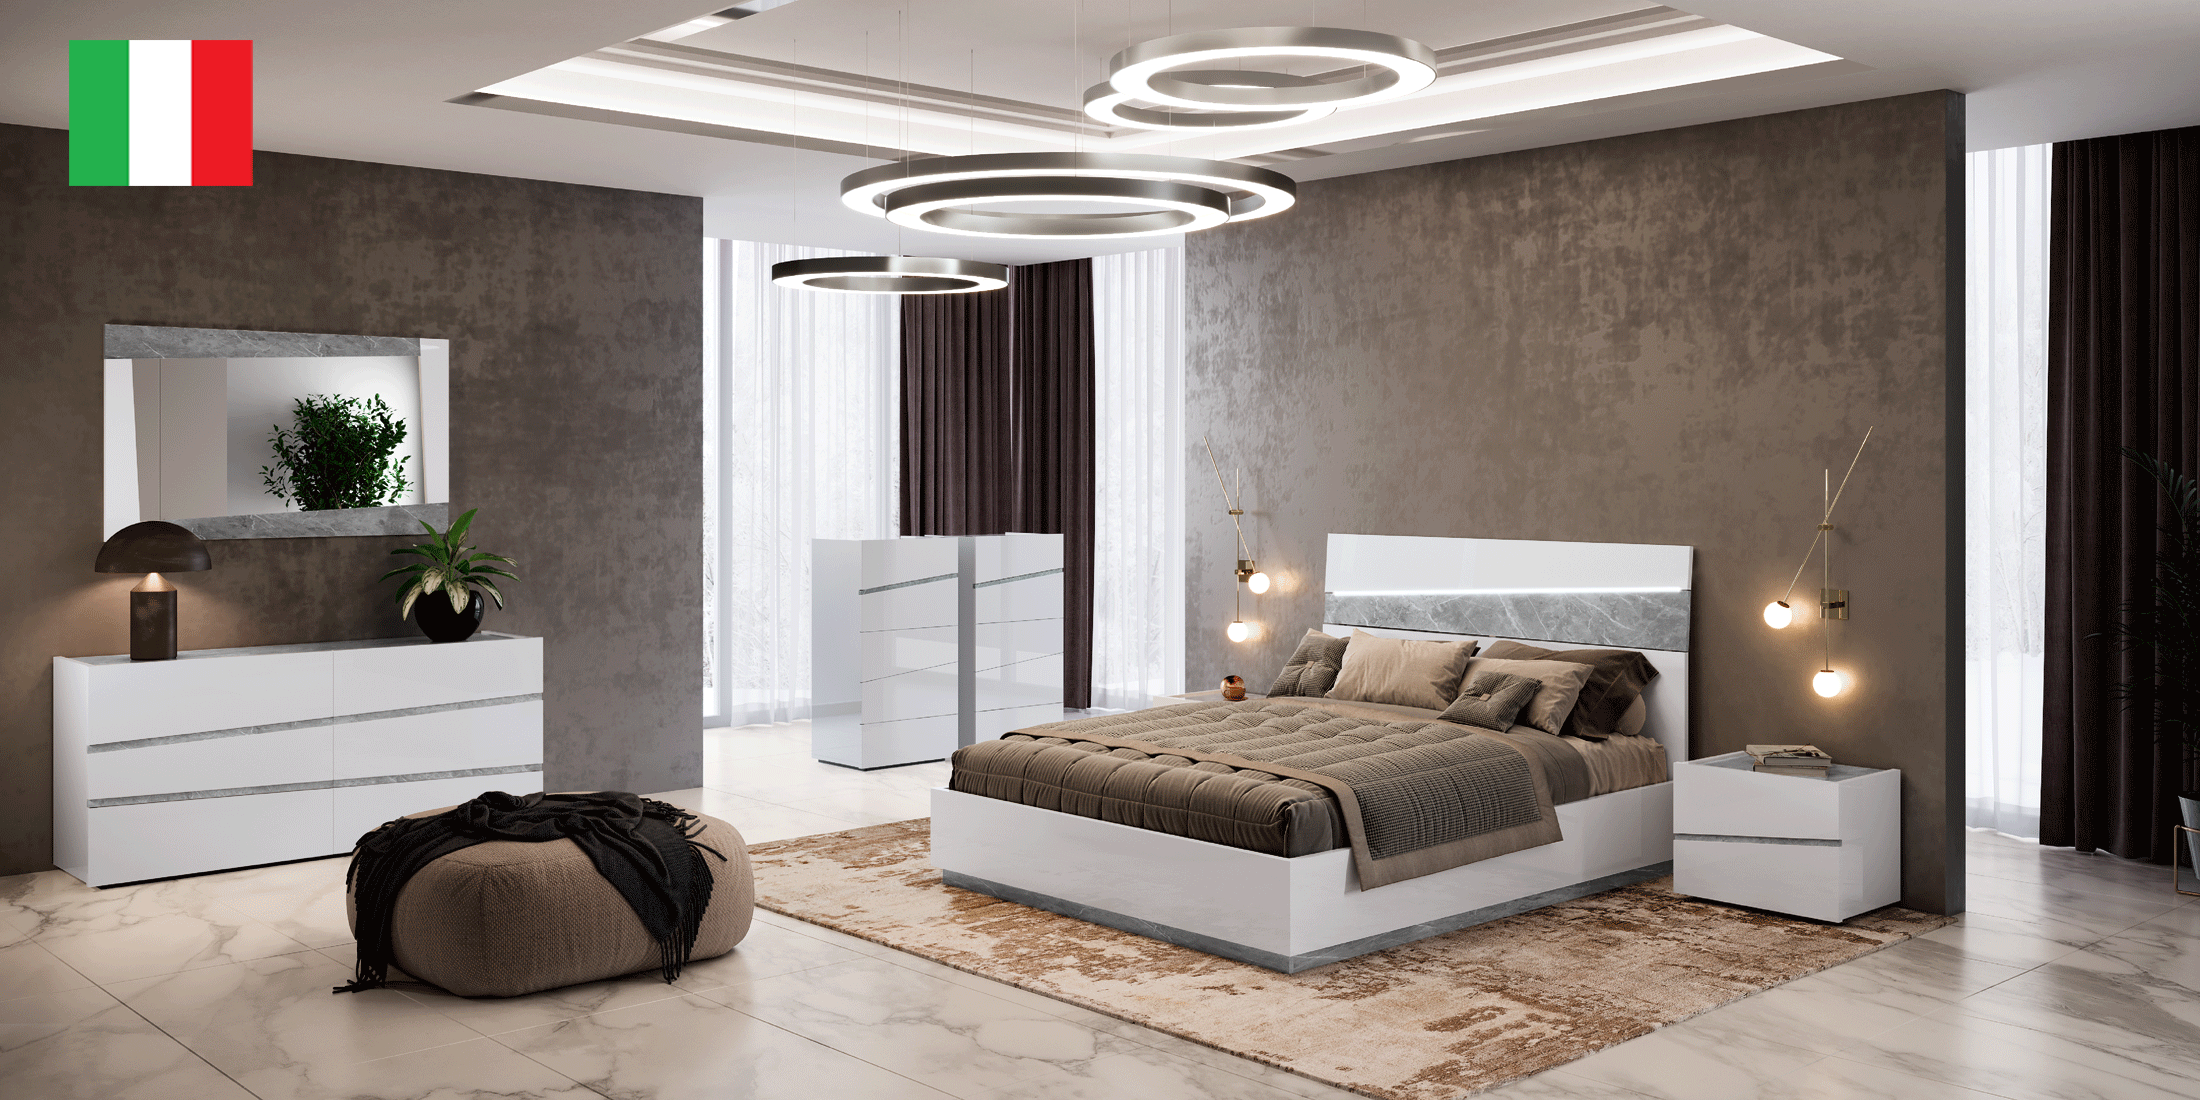 Brands Camel Modum Collection, Italy Alba Bedroom w/ Light by Camelgroup – Italy